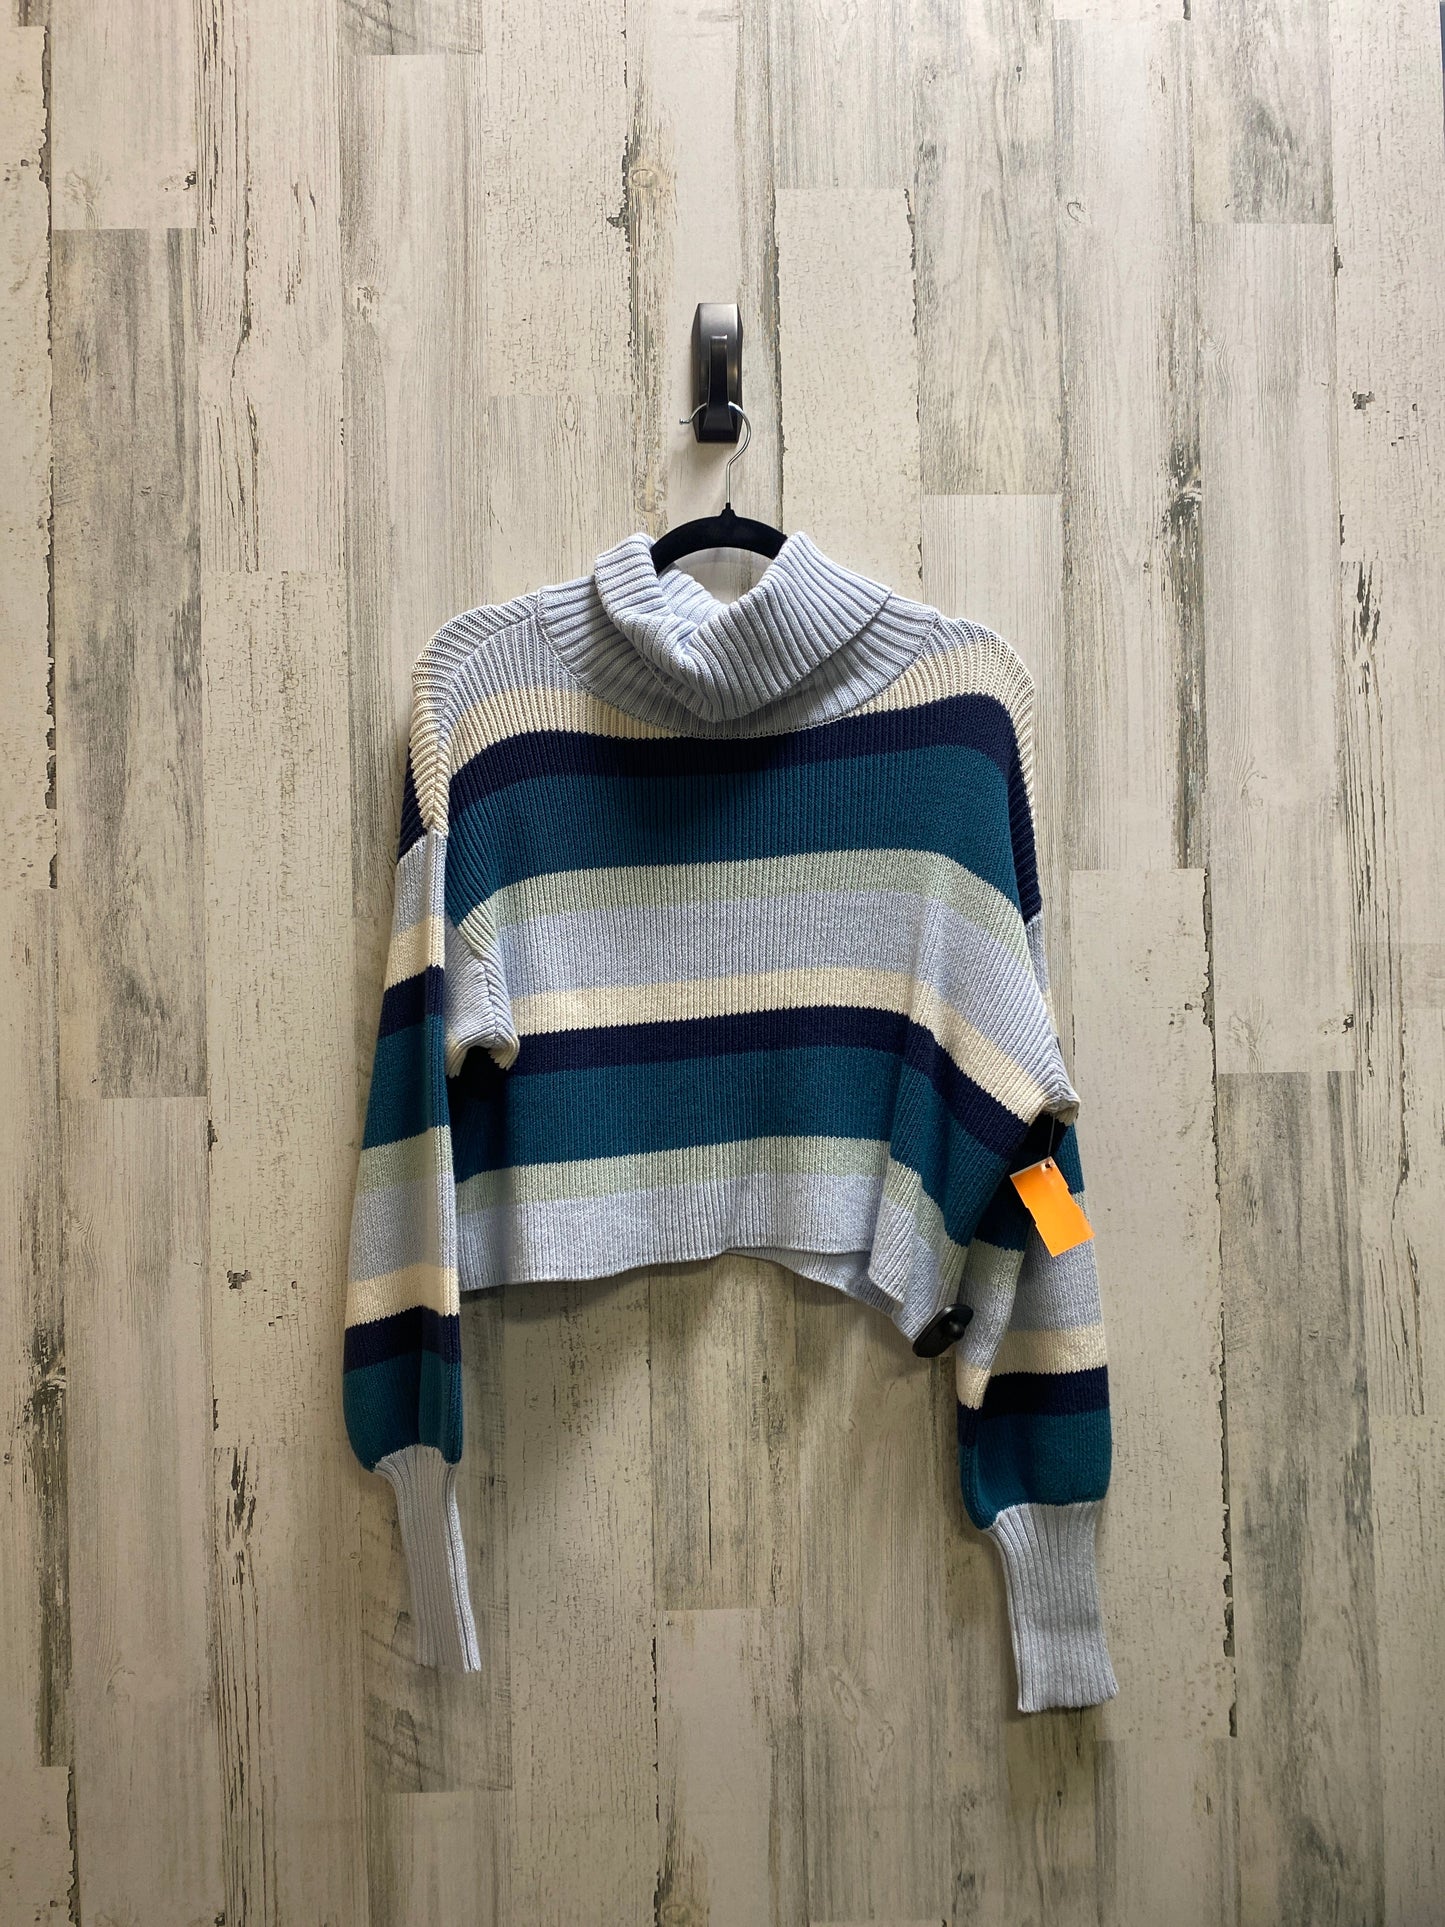 Sweater By Wild Fable  Size: M